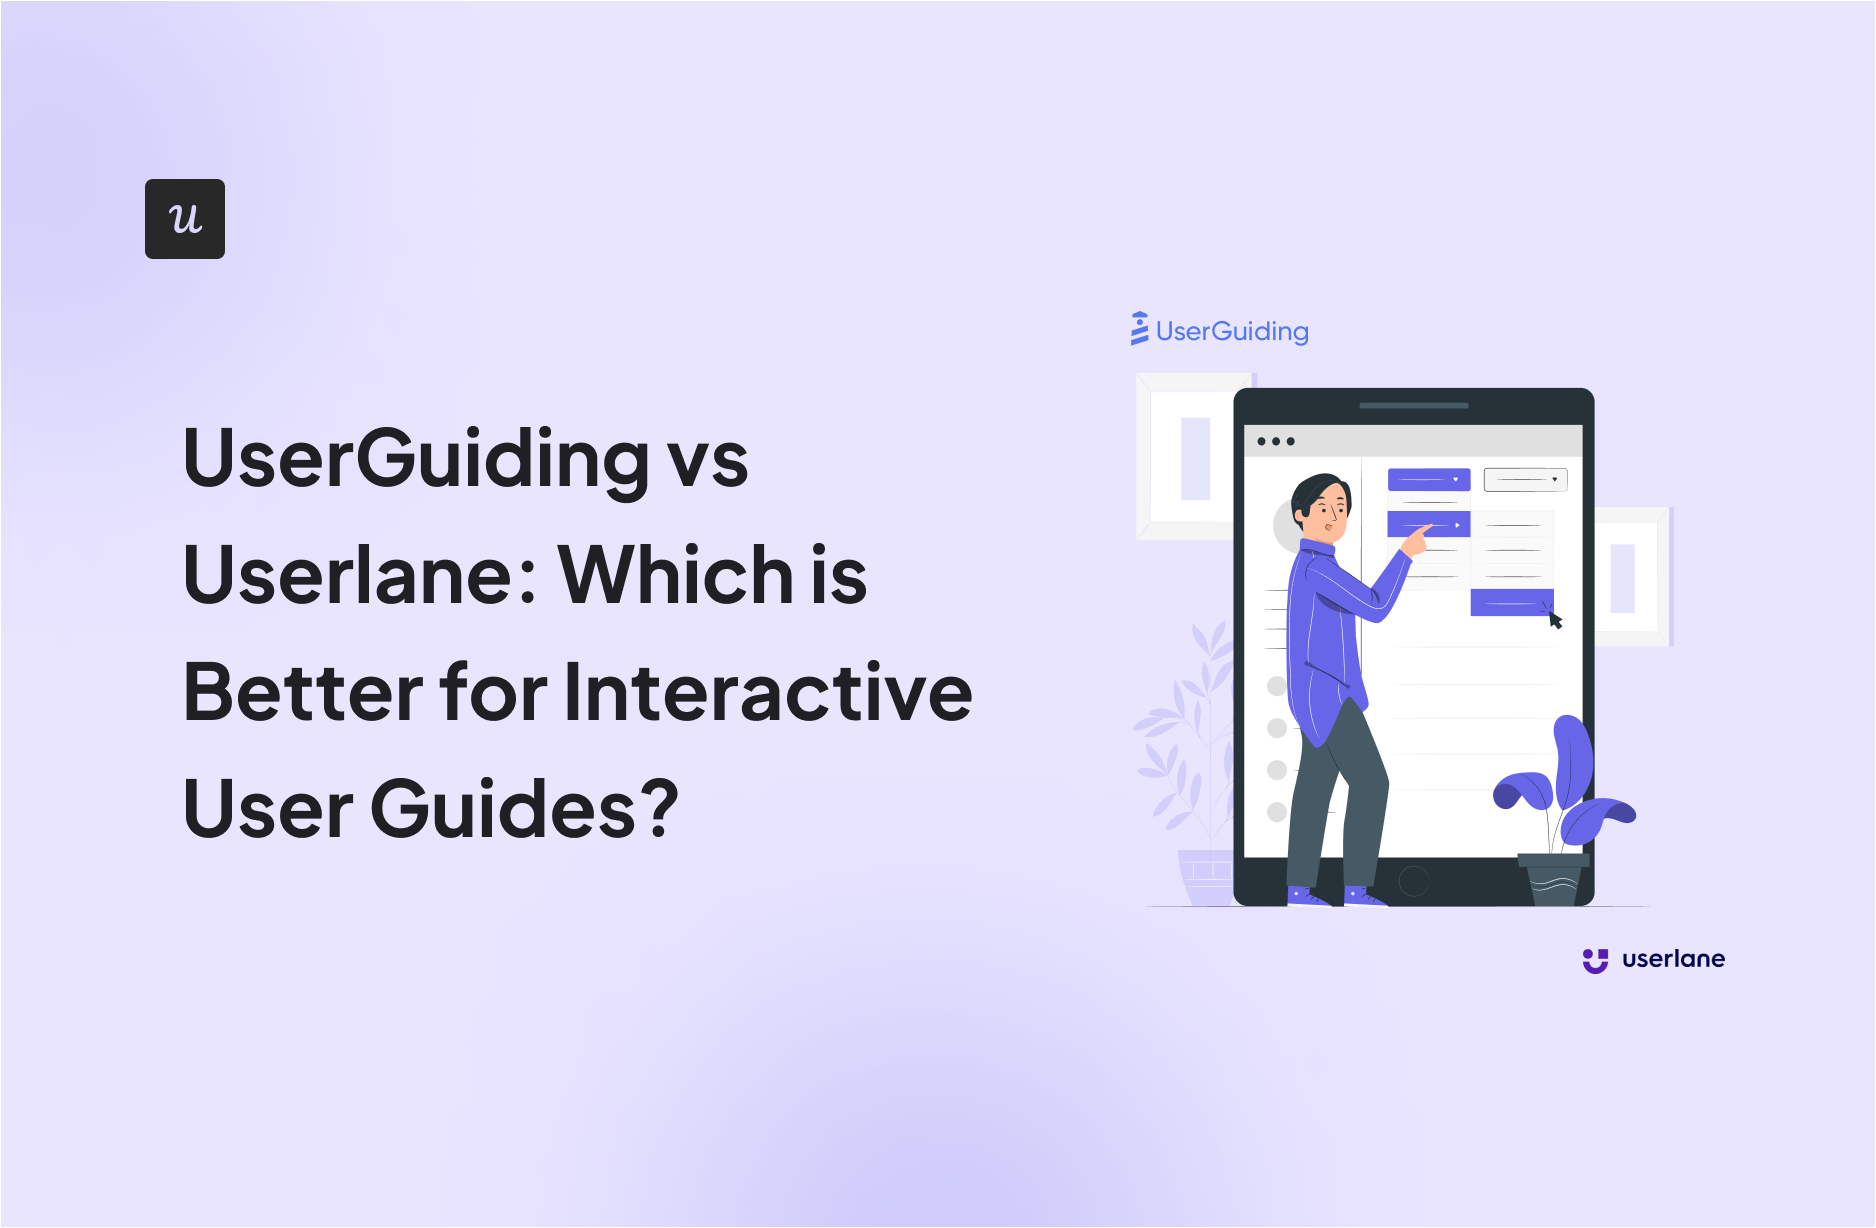 UserGuiding vs Userlane: Which is Better for Interactive User Guides?